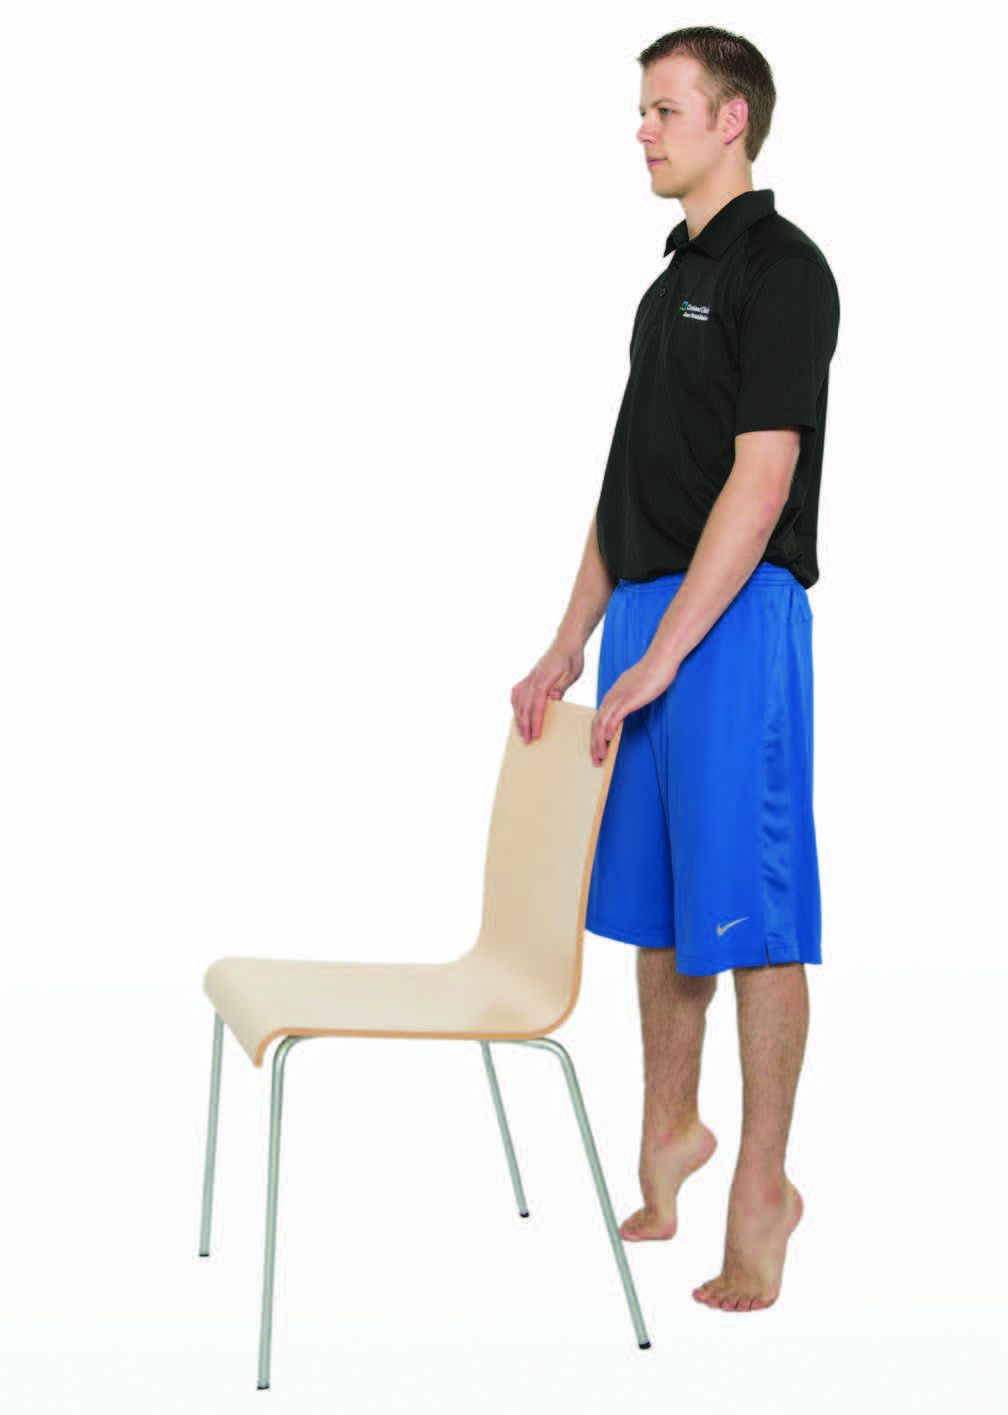 Stand Up for Brain Health with Chair Exercises - Healthy Brains by